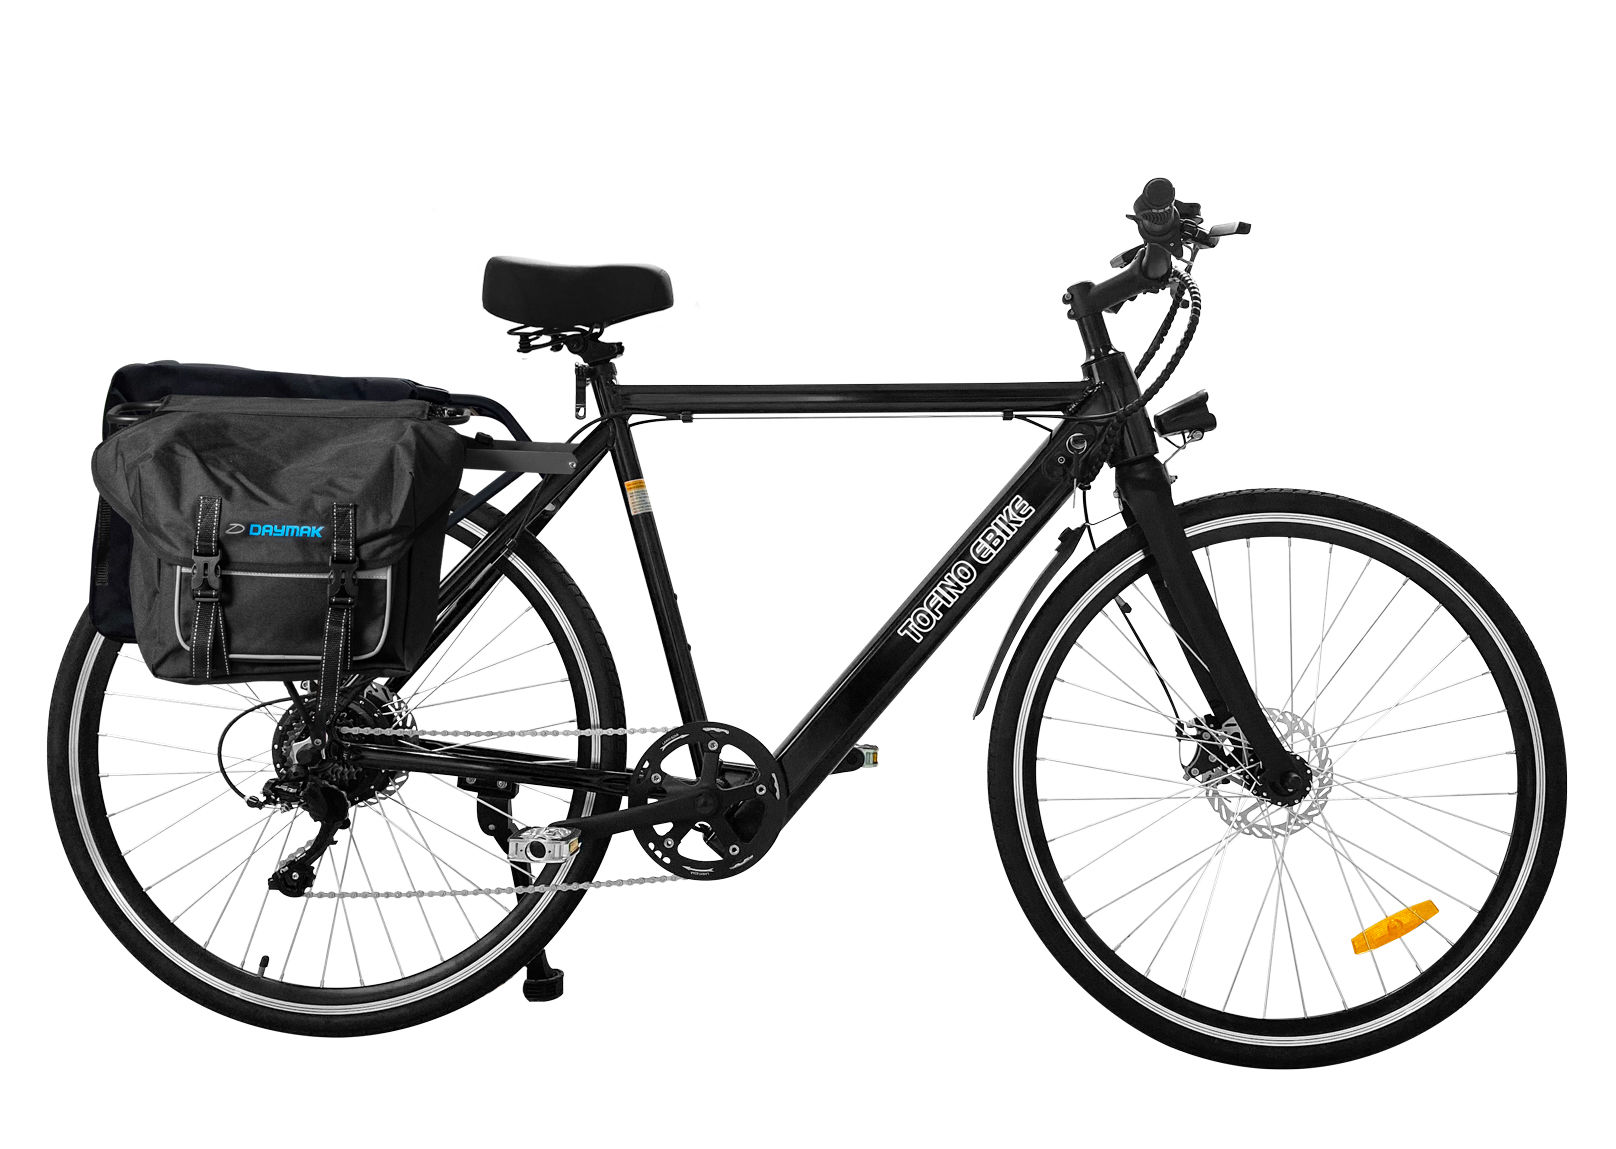 Get Ready to Explore the Great Outdoors on the Daymak Tofino X Electric Bike